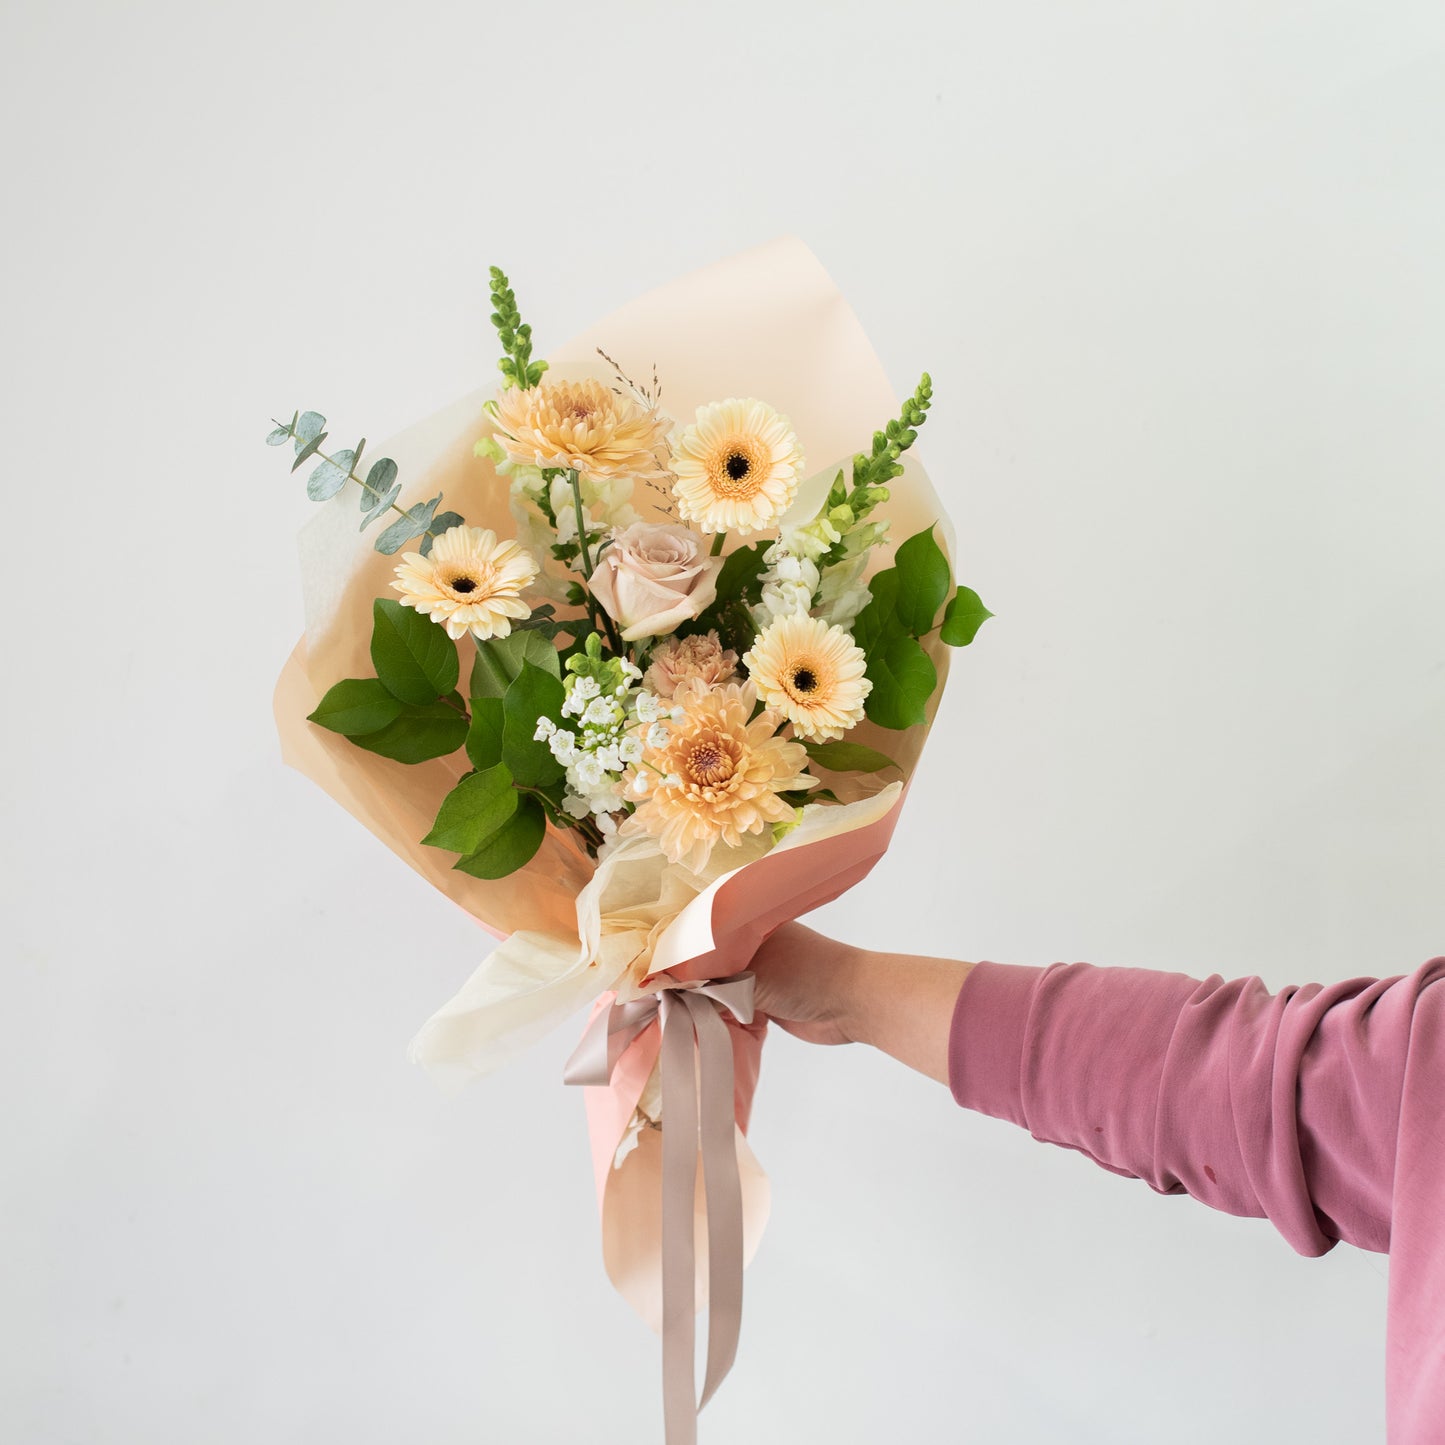 Small Hand-Tied Flowers